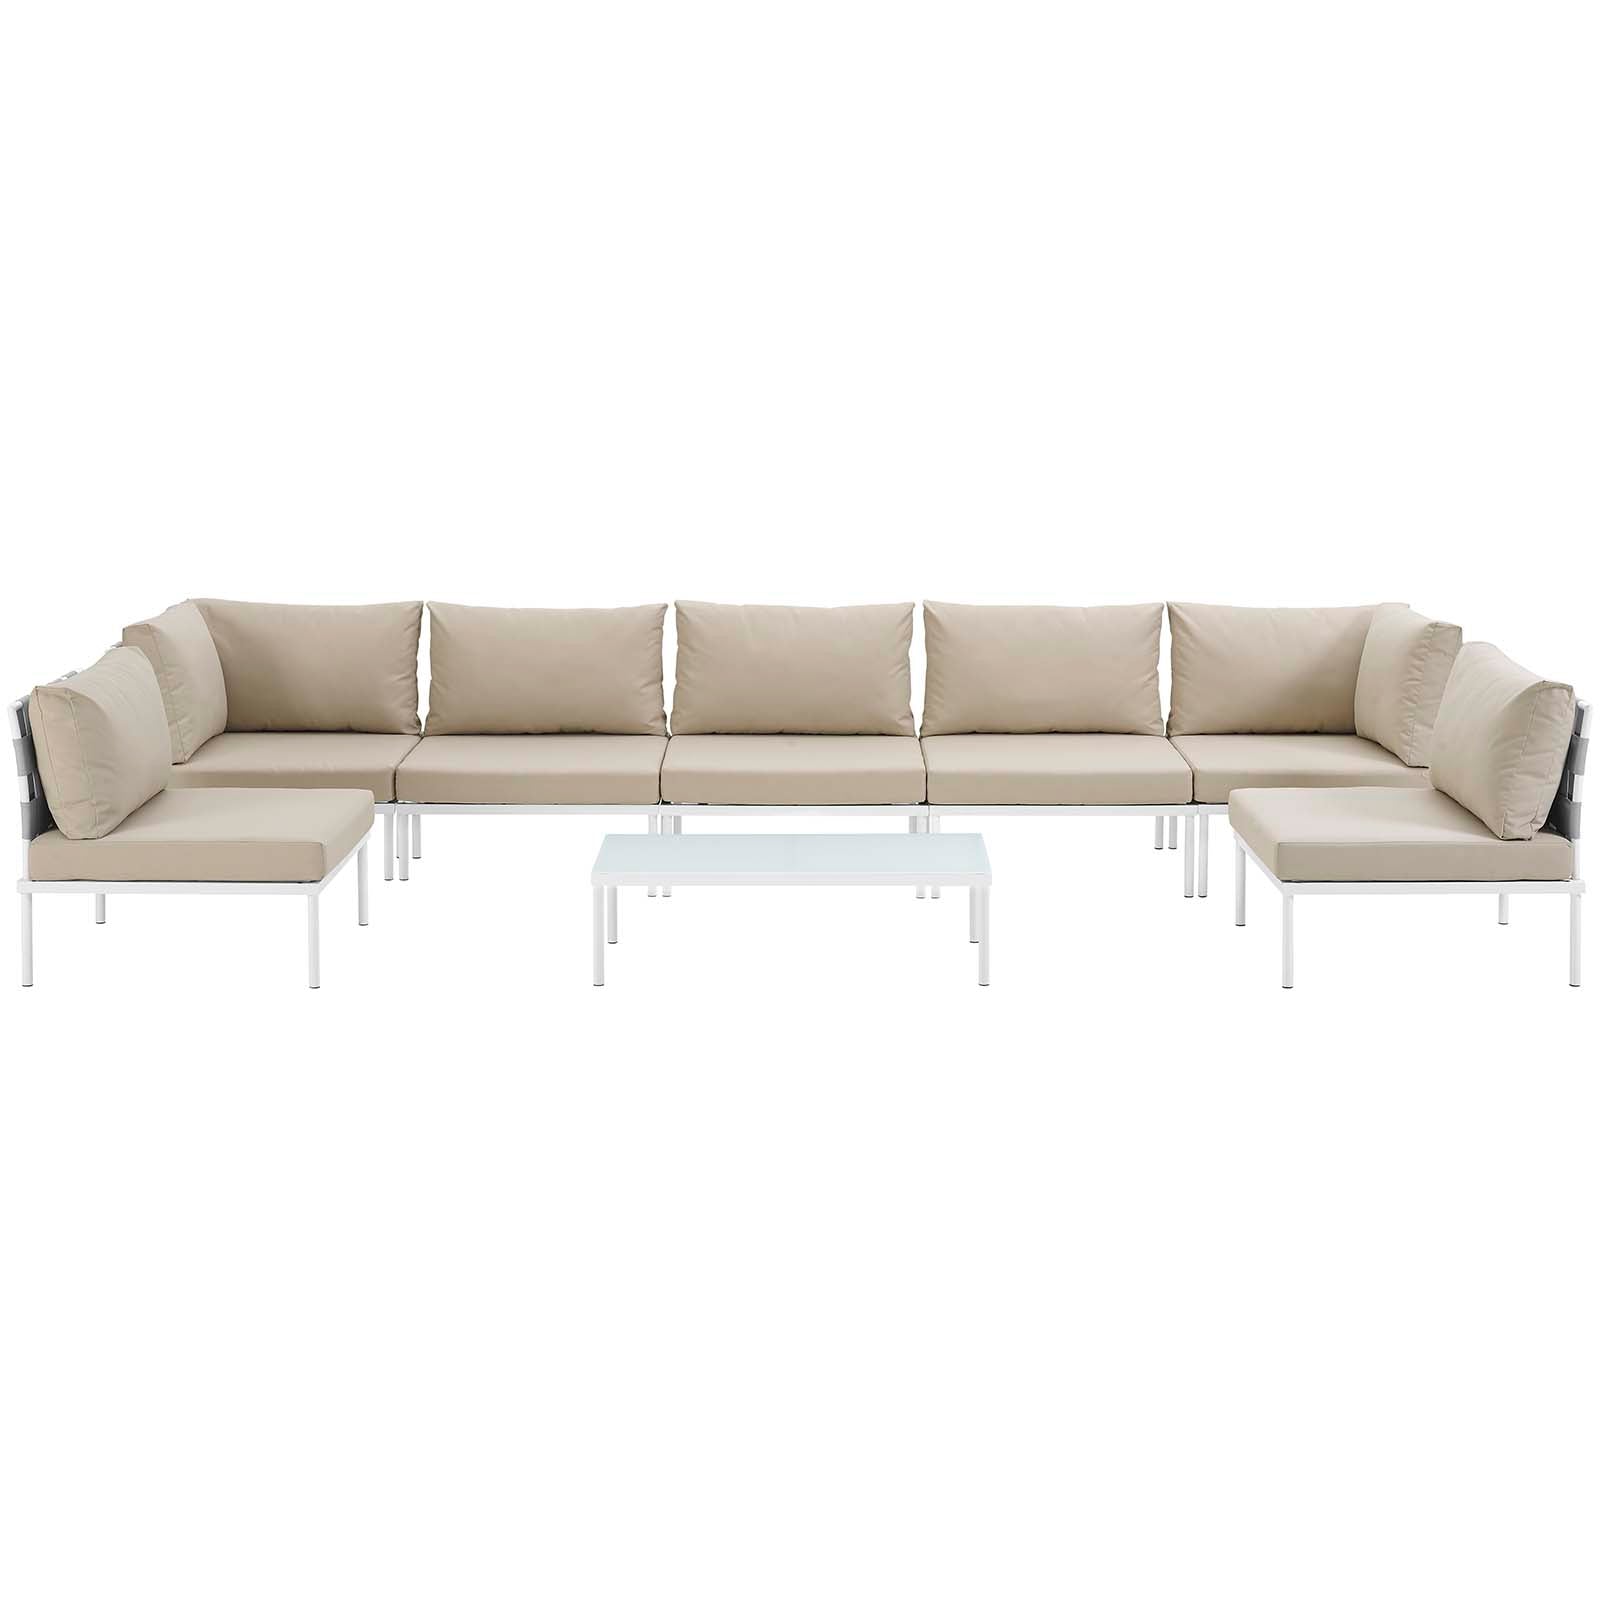 Modway Outdoor Conversation Sets - Harmony 8 Piece Outdoor 165"W Patio Aluminum Sectional Sofa Set Whit